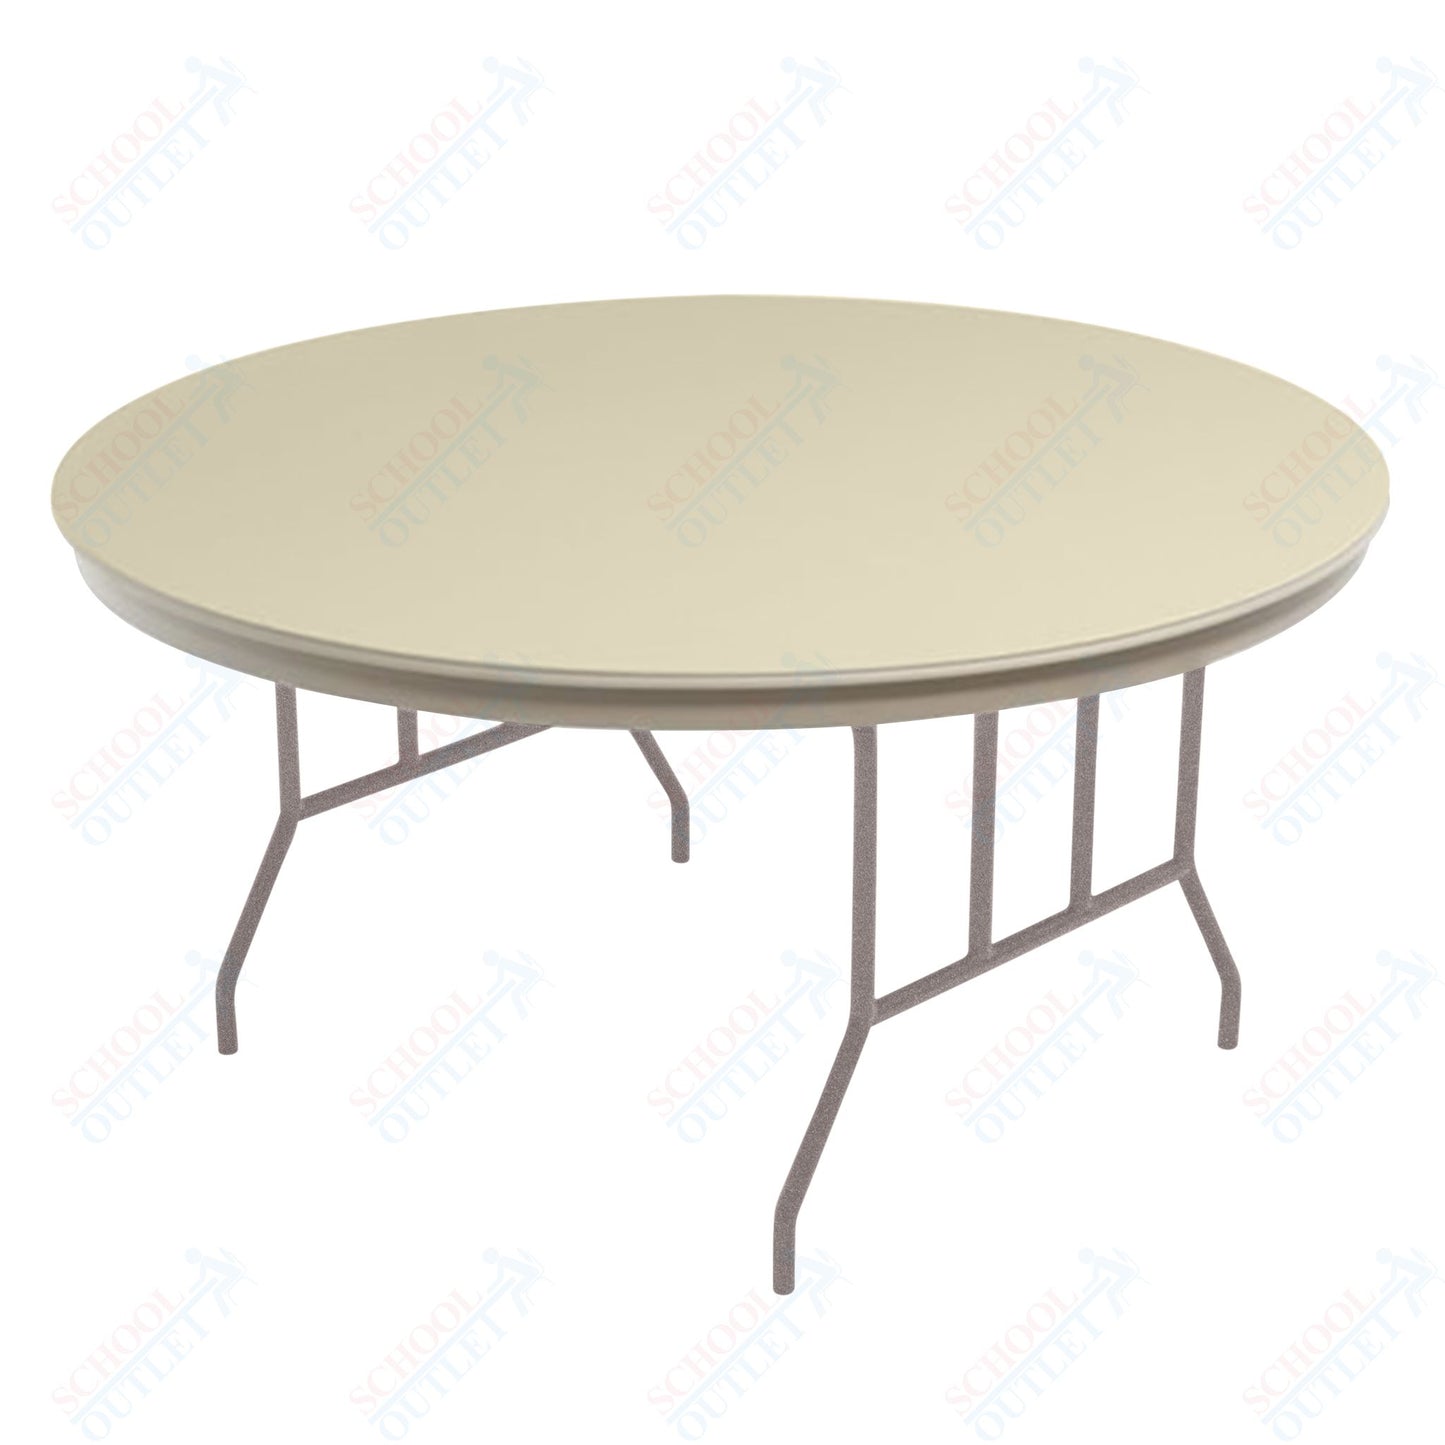 AmTab Dynalite Featherweight Heavy - Duty ABS Plastic Folding Table - Round - 48" Diameter x 29"H (AmTab AMT - R48DL) - SchoolOutlet